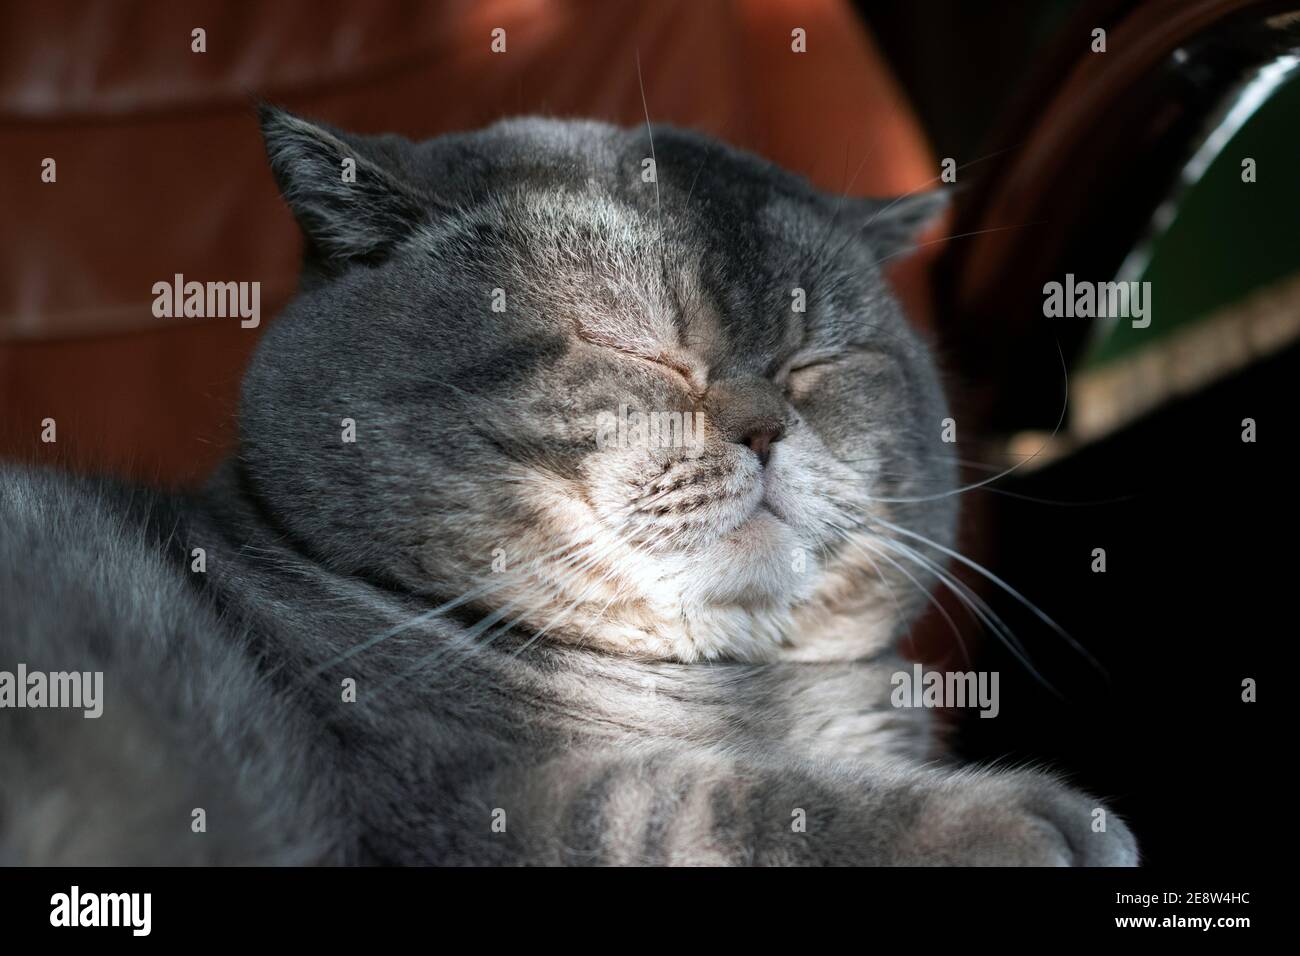 Sleepy British shorthair cat warming up on the sun rays in office chair. Stock Photo